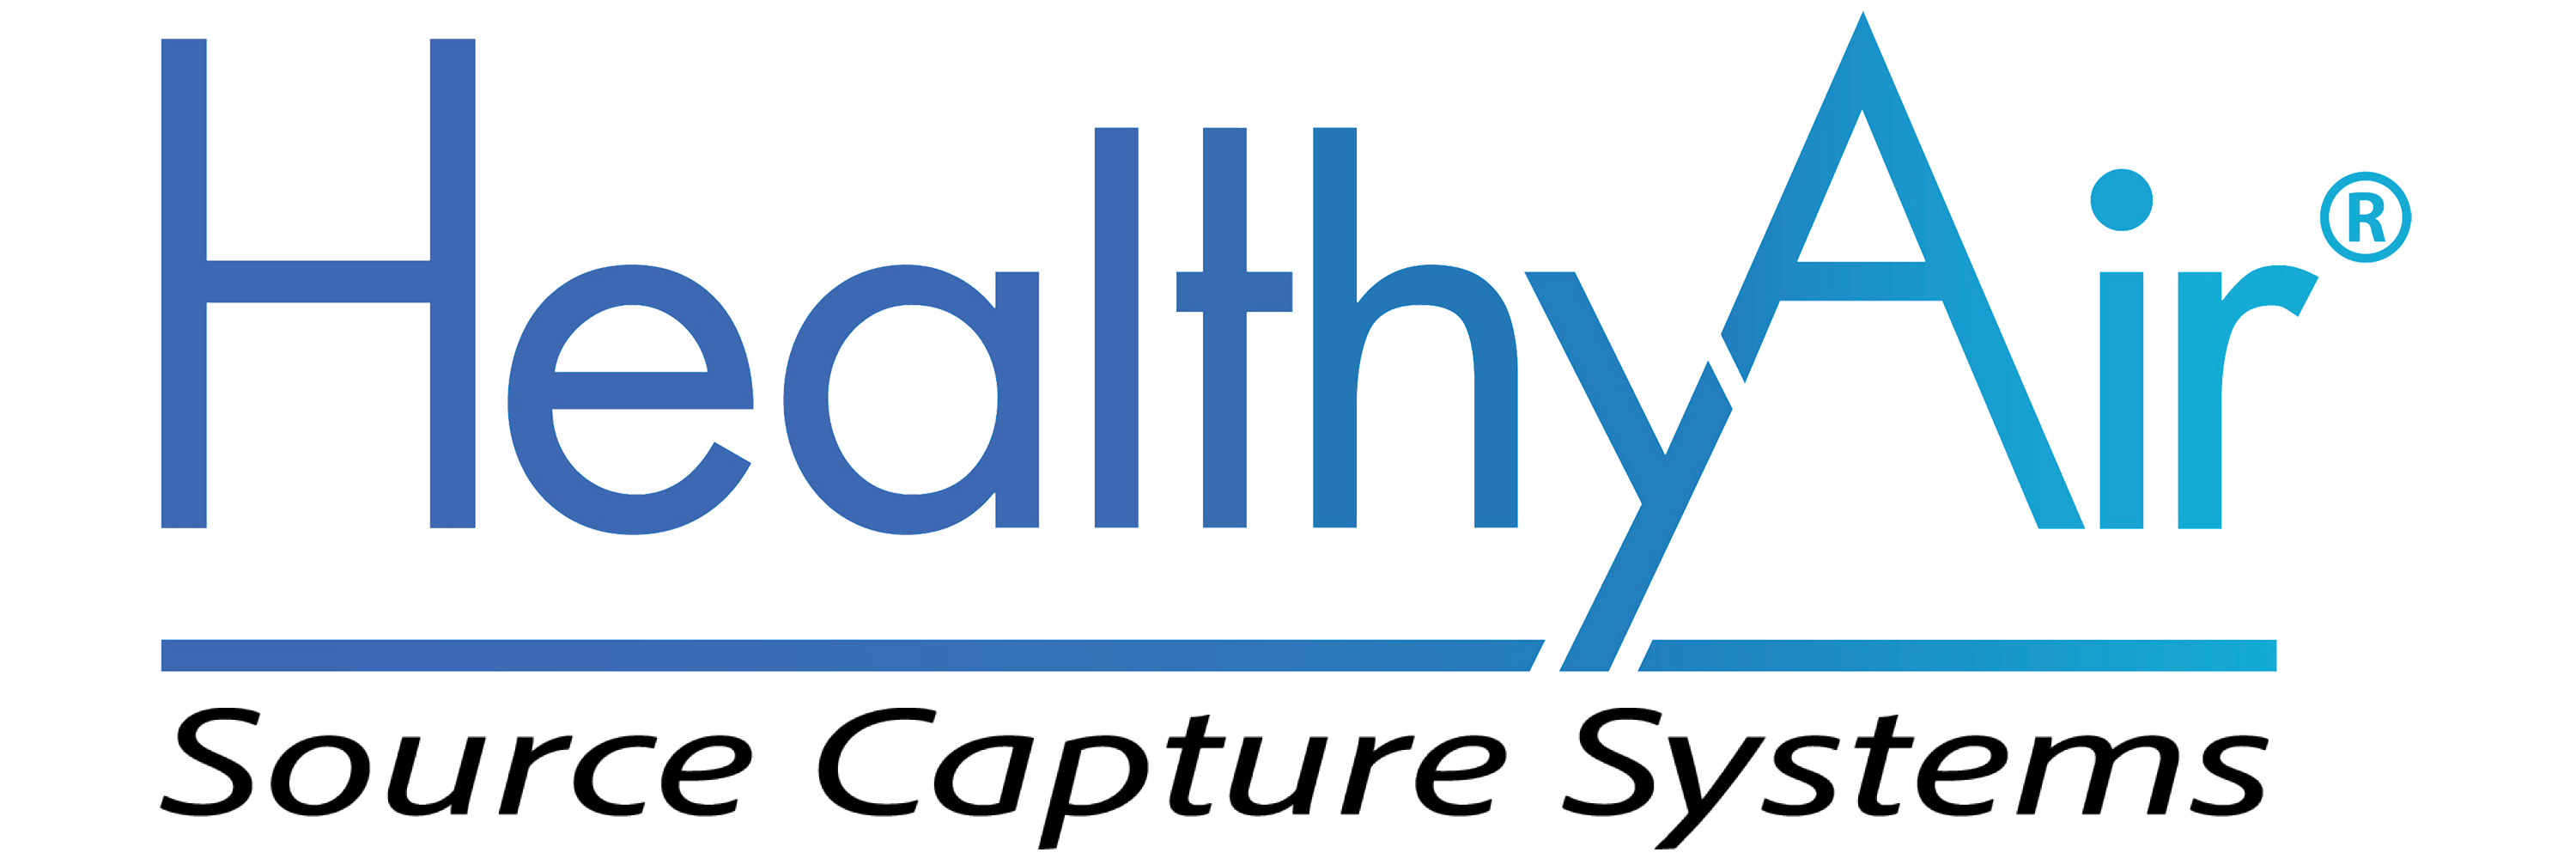 HealthyAir eHEPA Source Capture Systems capture airborne contaminants in commercial settings to reduce occupational health hazards 